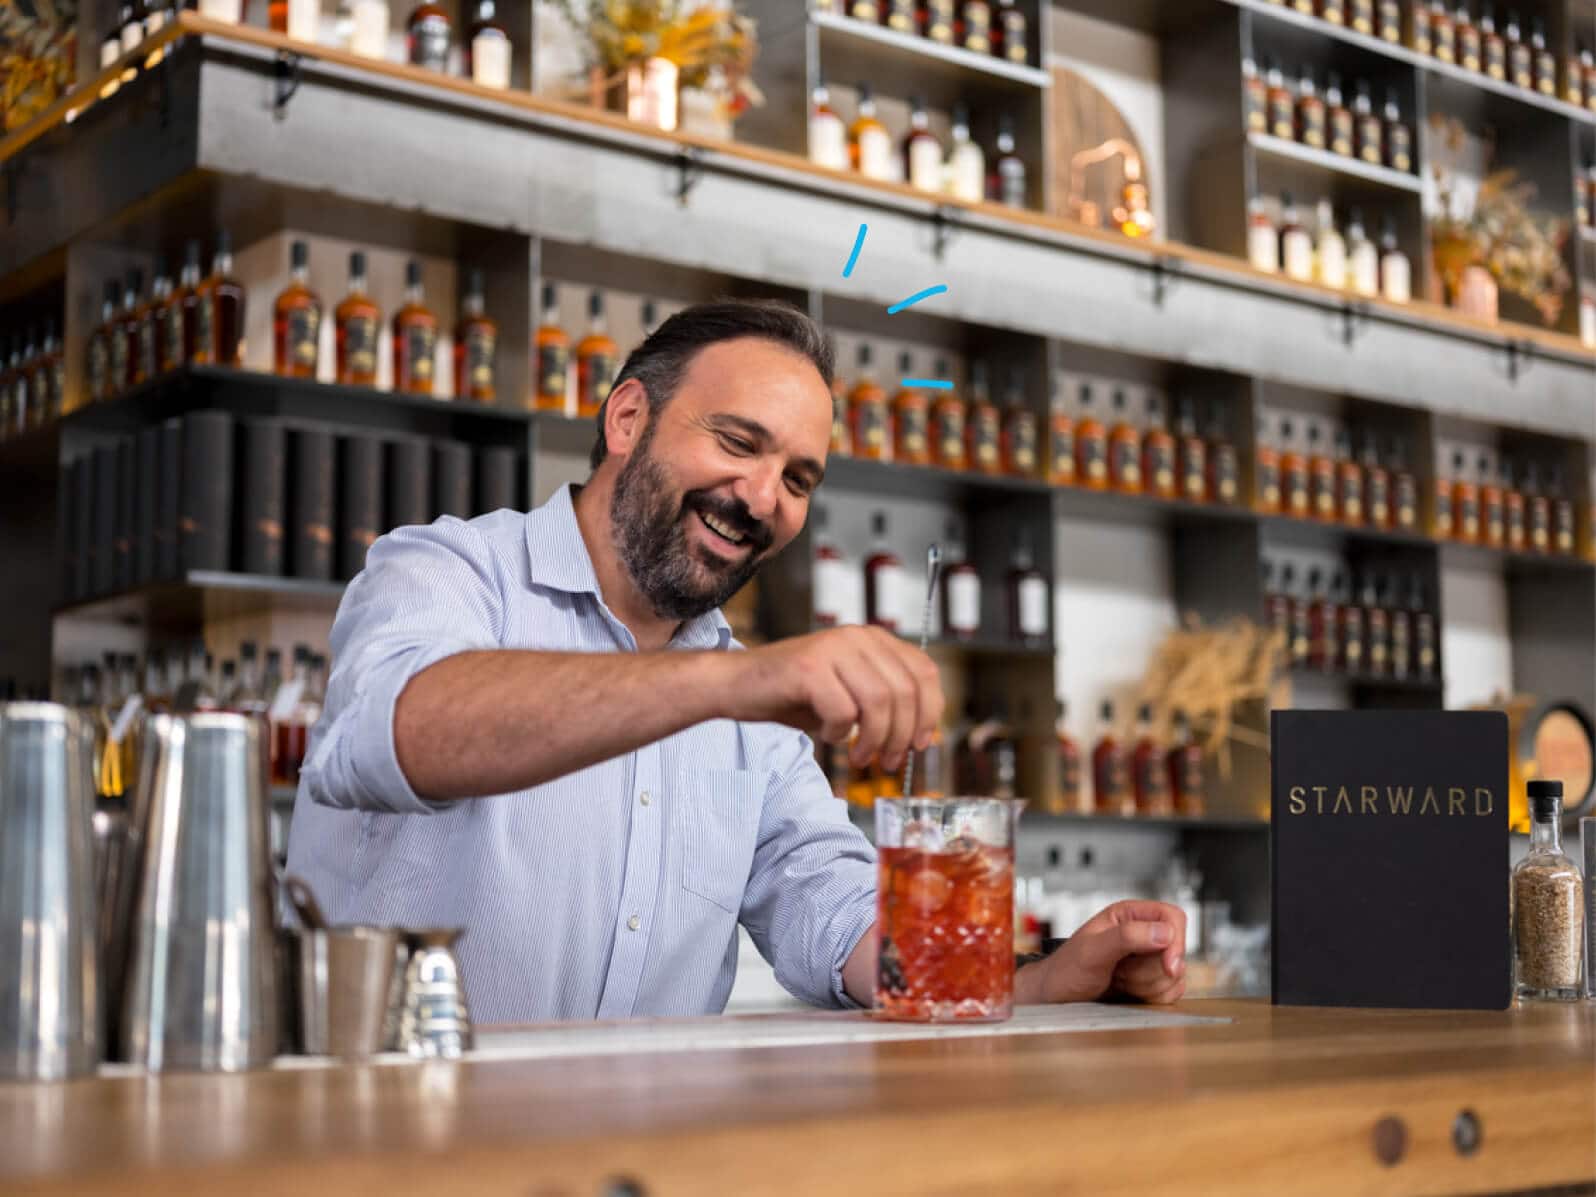 A man is behind a bar, smiling while pouring a drink.